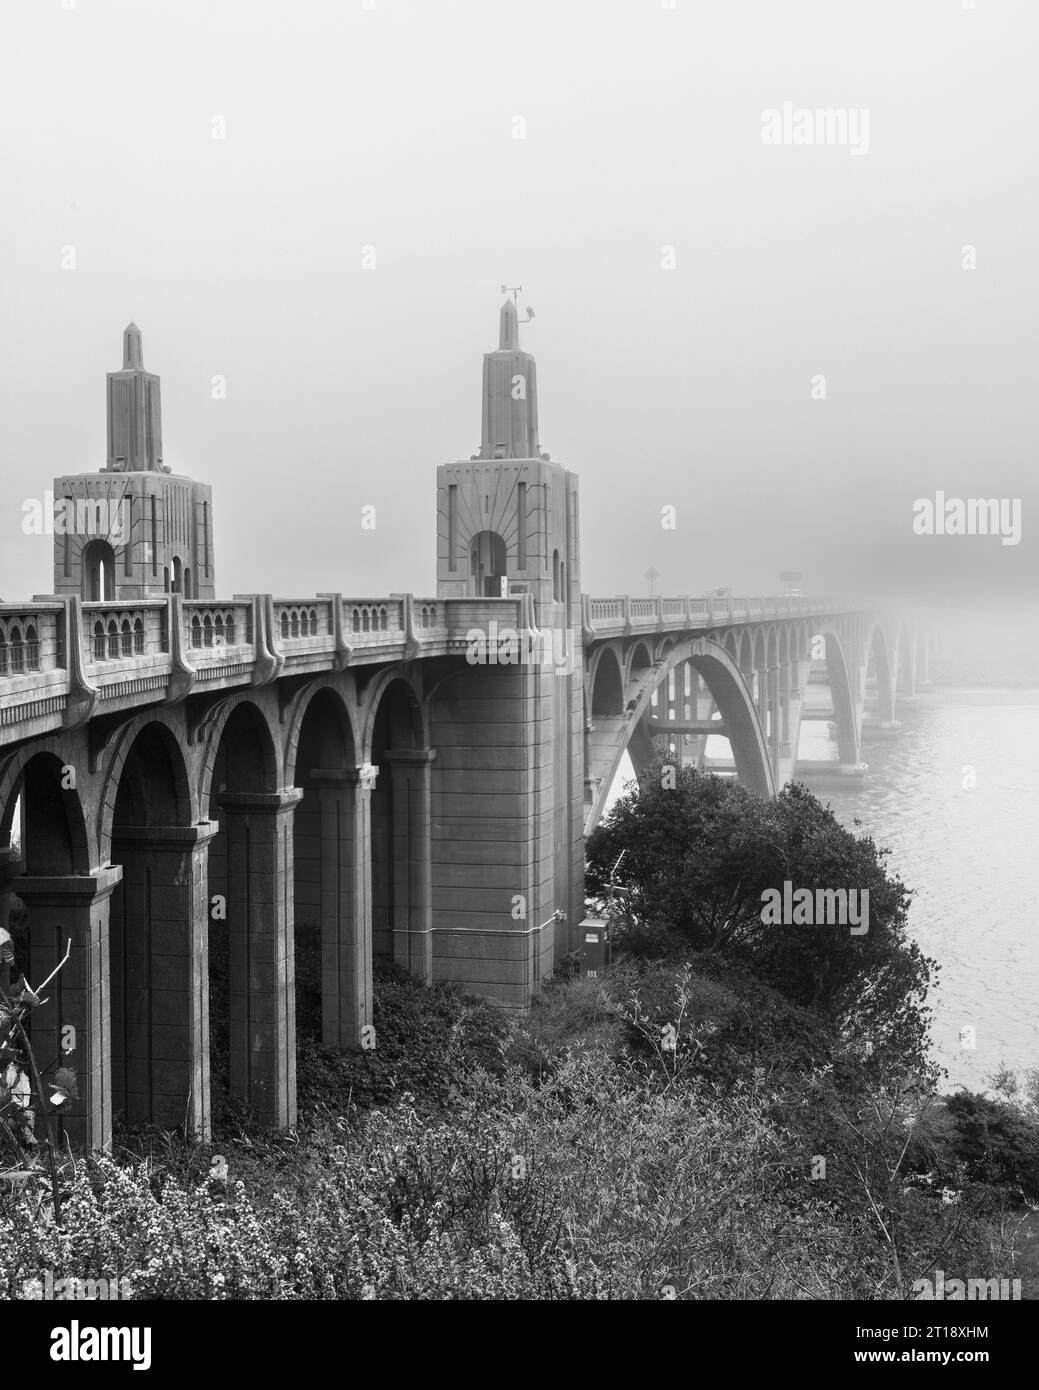 The Isaac Lee Patterson Bridge on US 101 over the mouth of the Rogue River in Gold Beach Oregon on a foggy day in black and white. Stock Photo